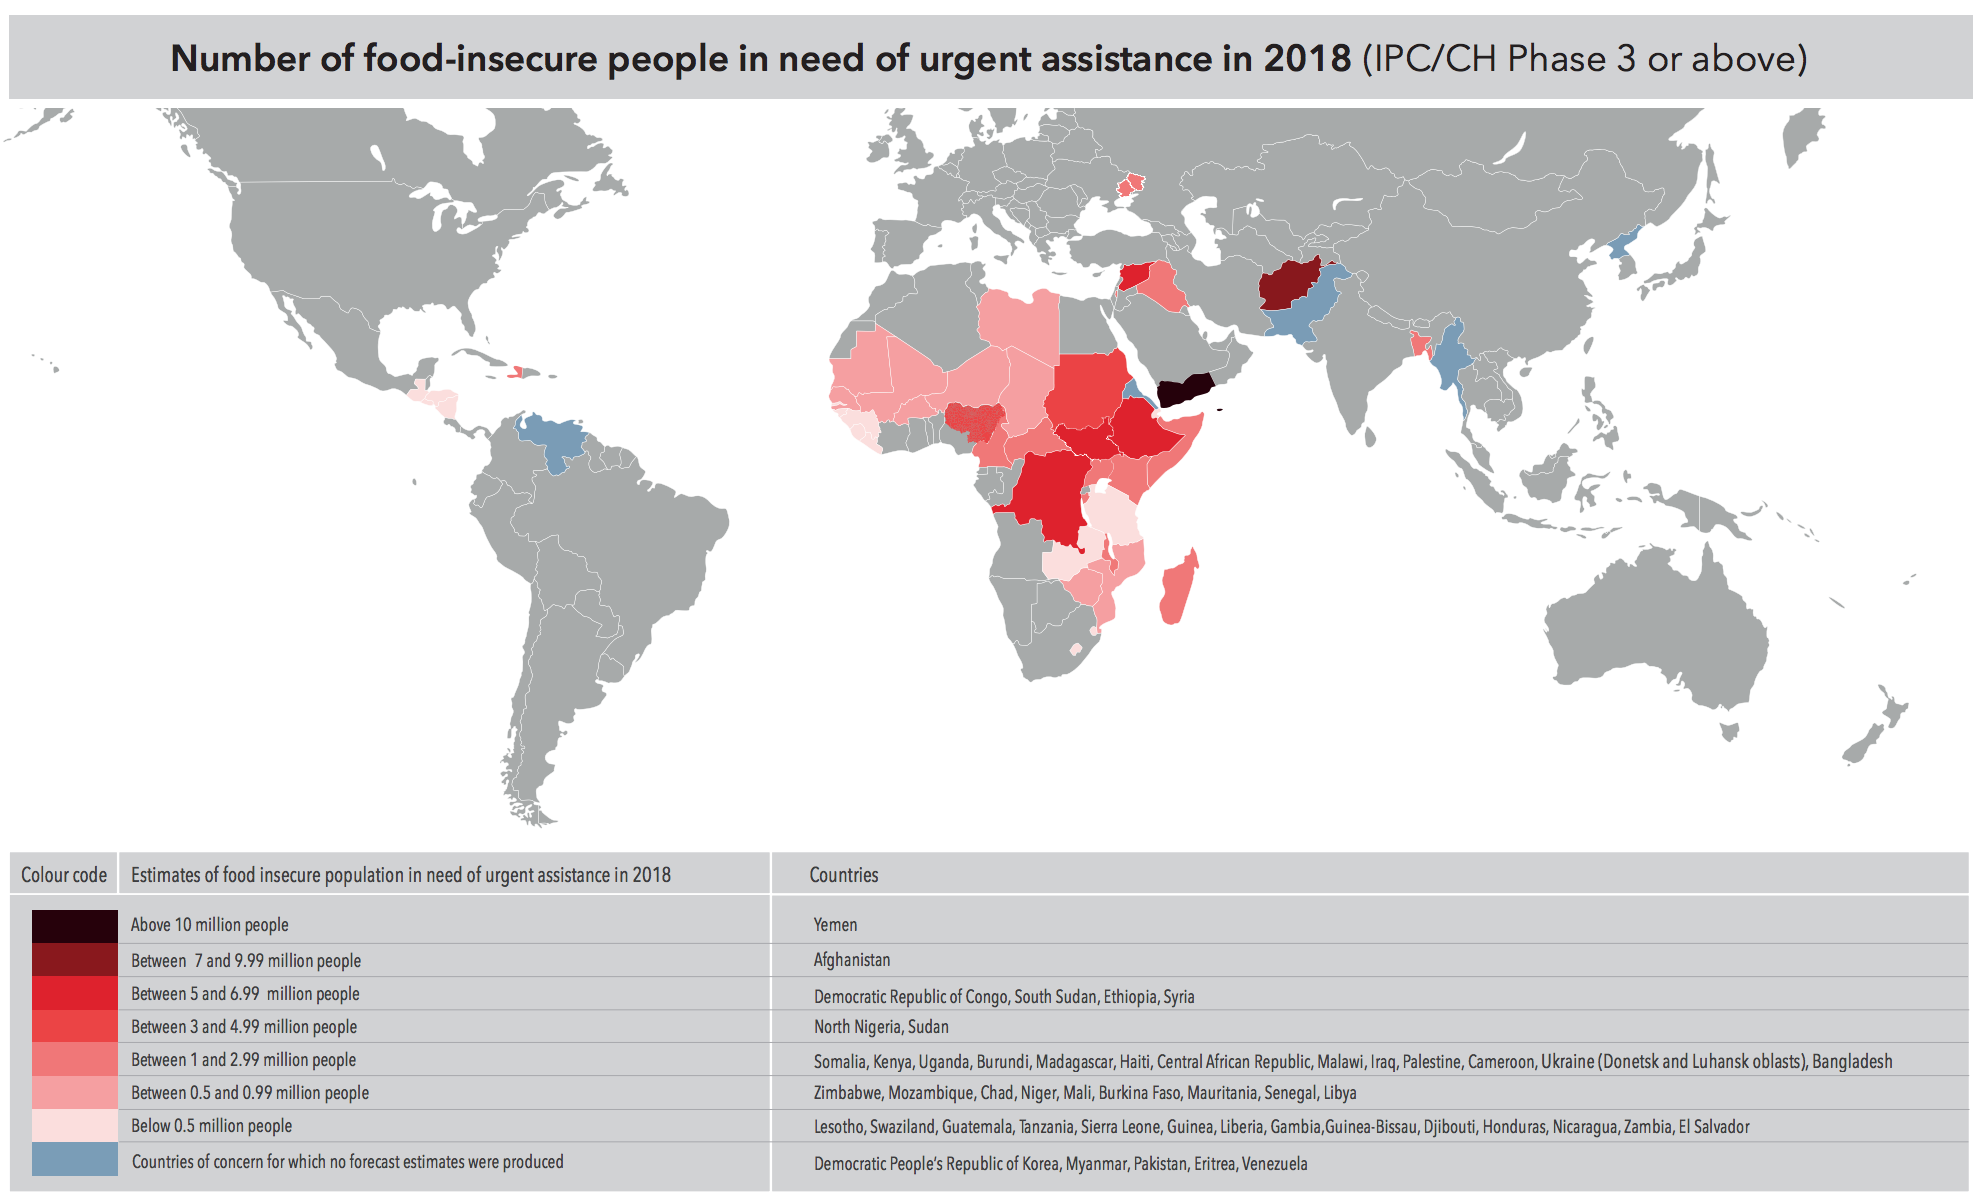 2018 global report on food crises shows rising food insecurity, need